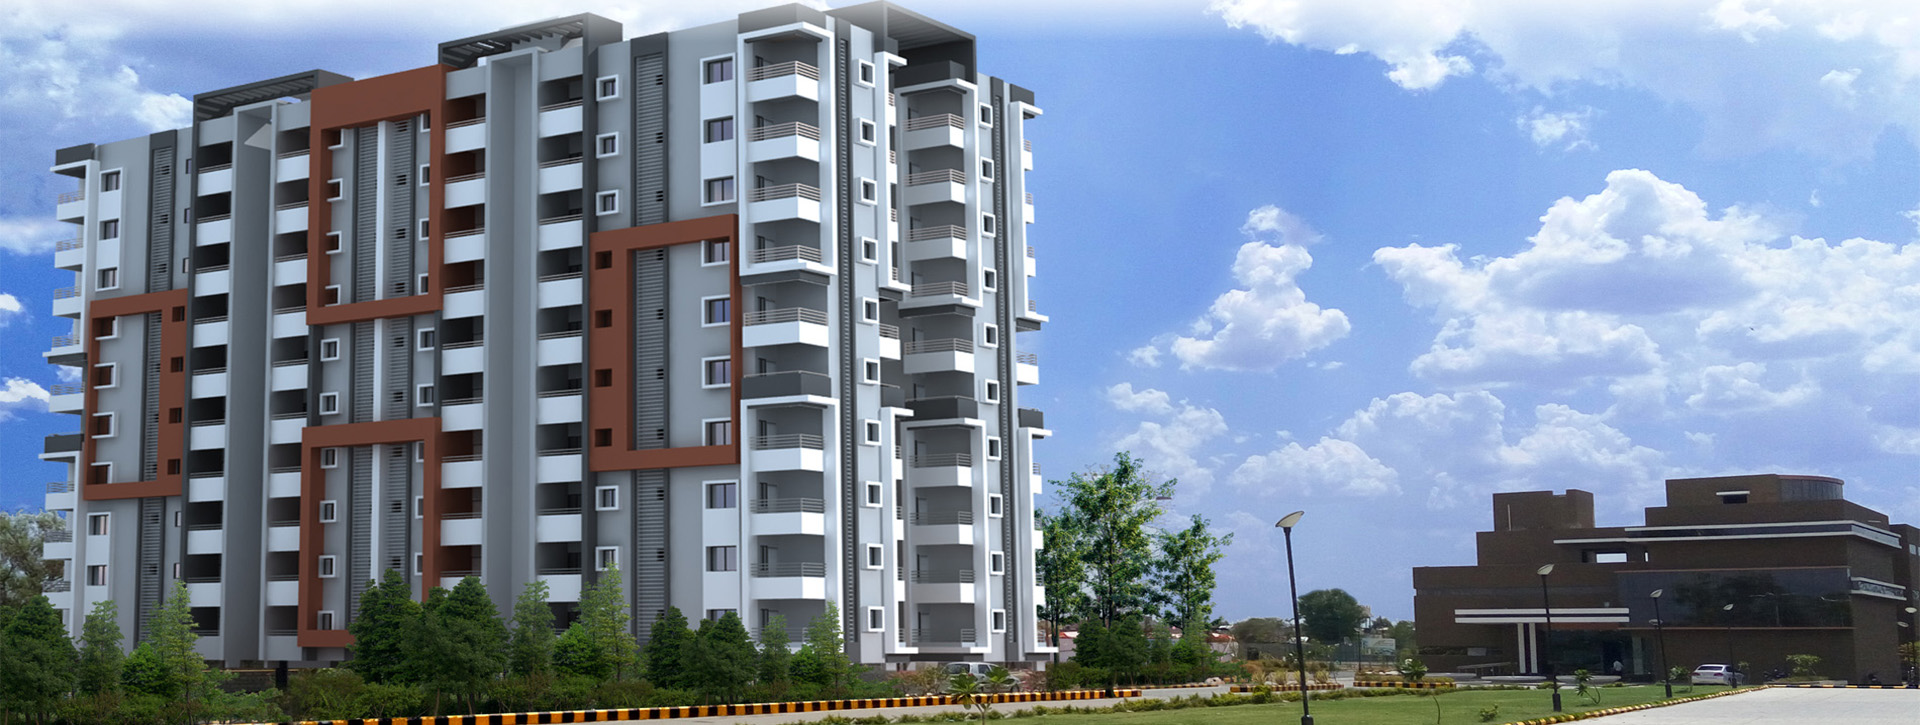 Buy Flats For Sale In Mihan Nagpur